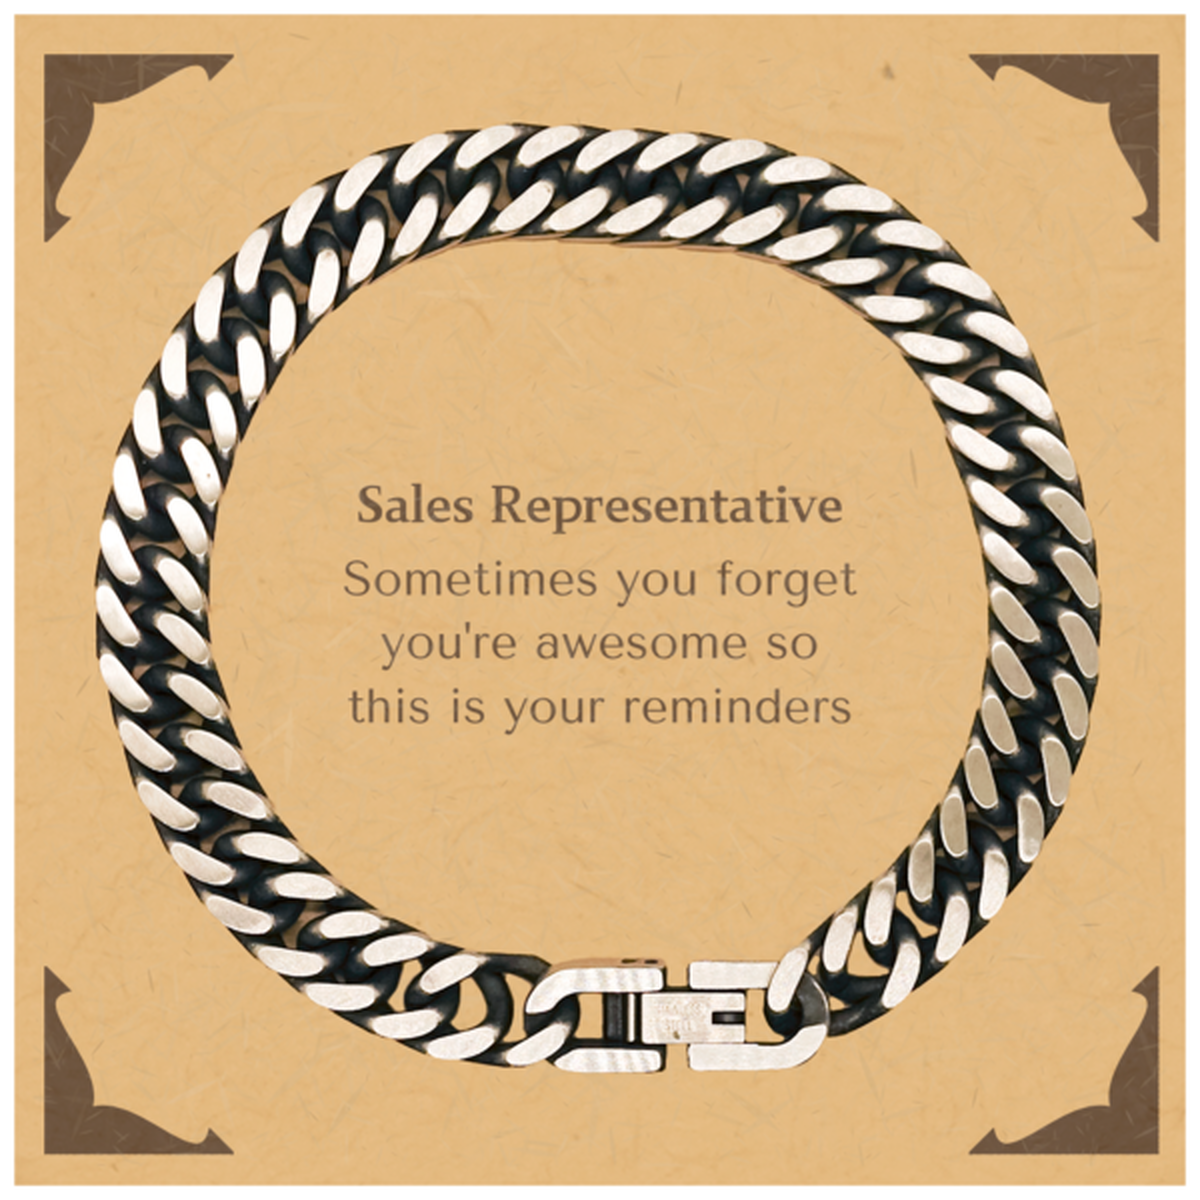 Sentimental Sales Representative Cuban Link Chain Bracelet, Sales Representative Sometimes you forget you're awesome so this is your reminders, Graduation Christmas Birthday Gifts for Sales Representative, Men, Women, Coworkers